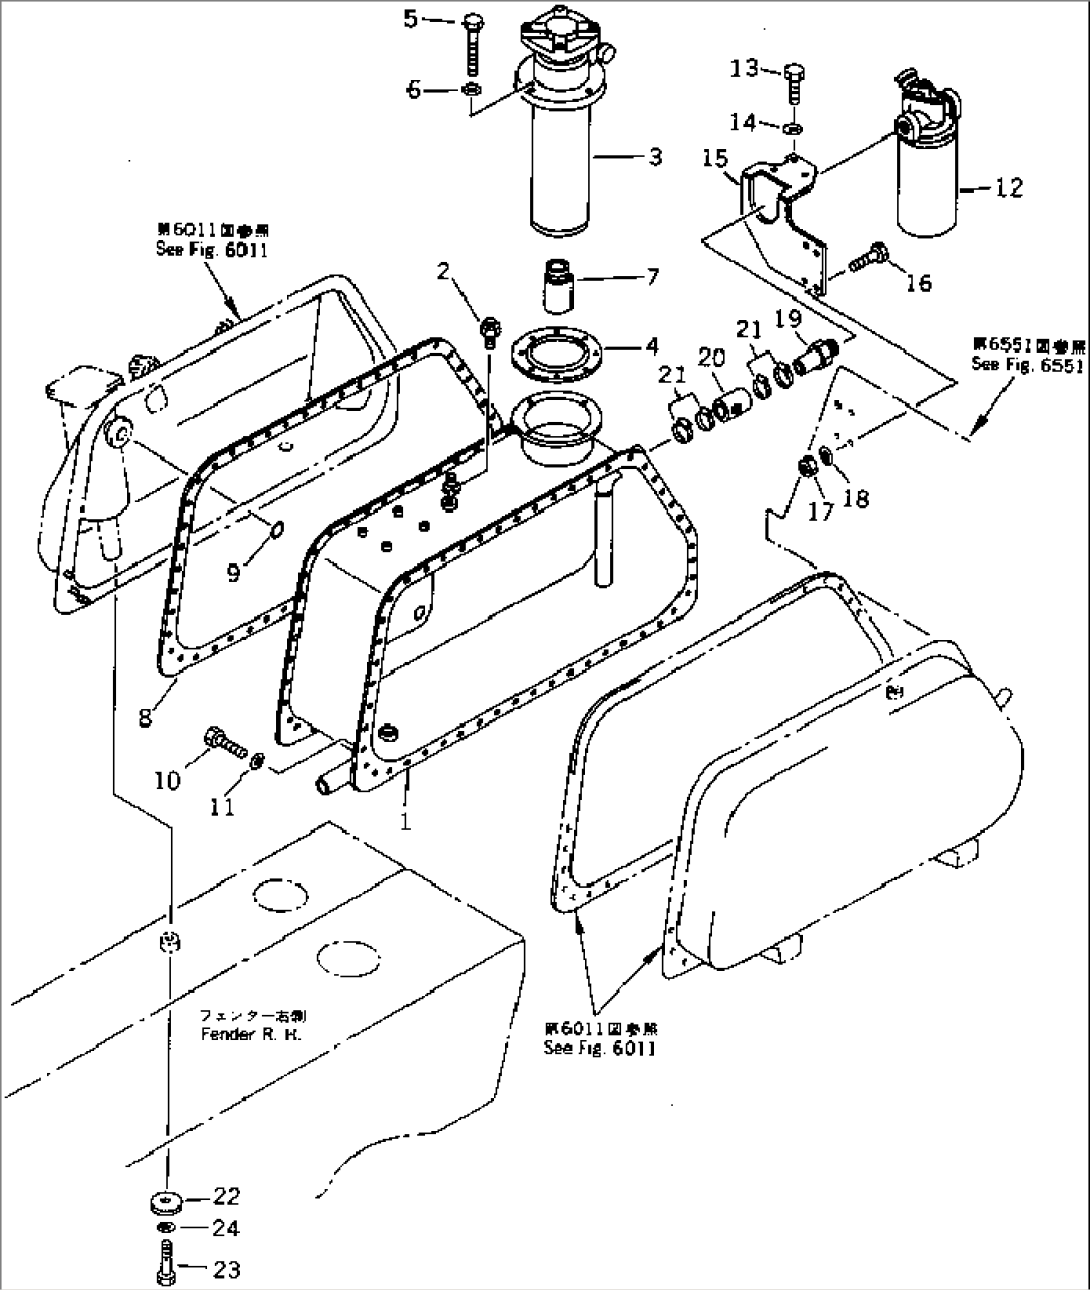 HYDRAULIC TANK AND FILTER (3/3)